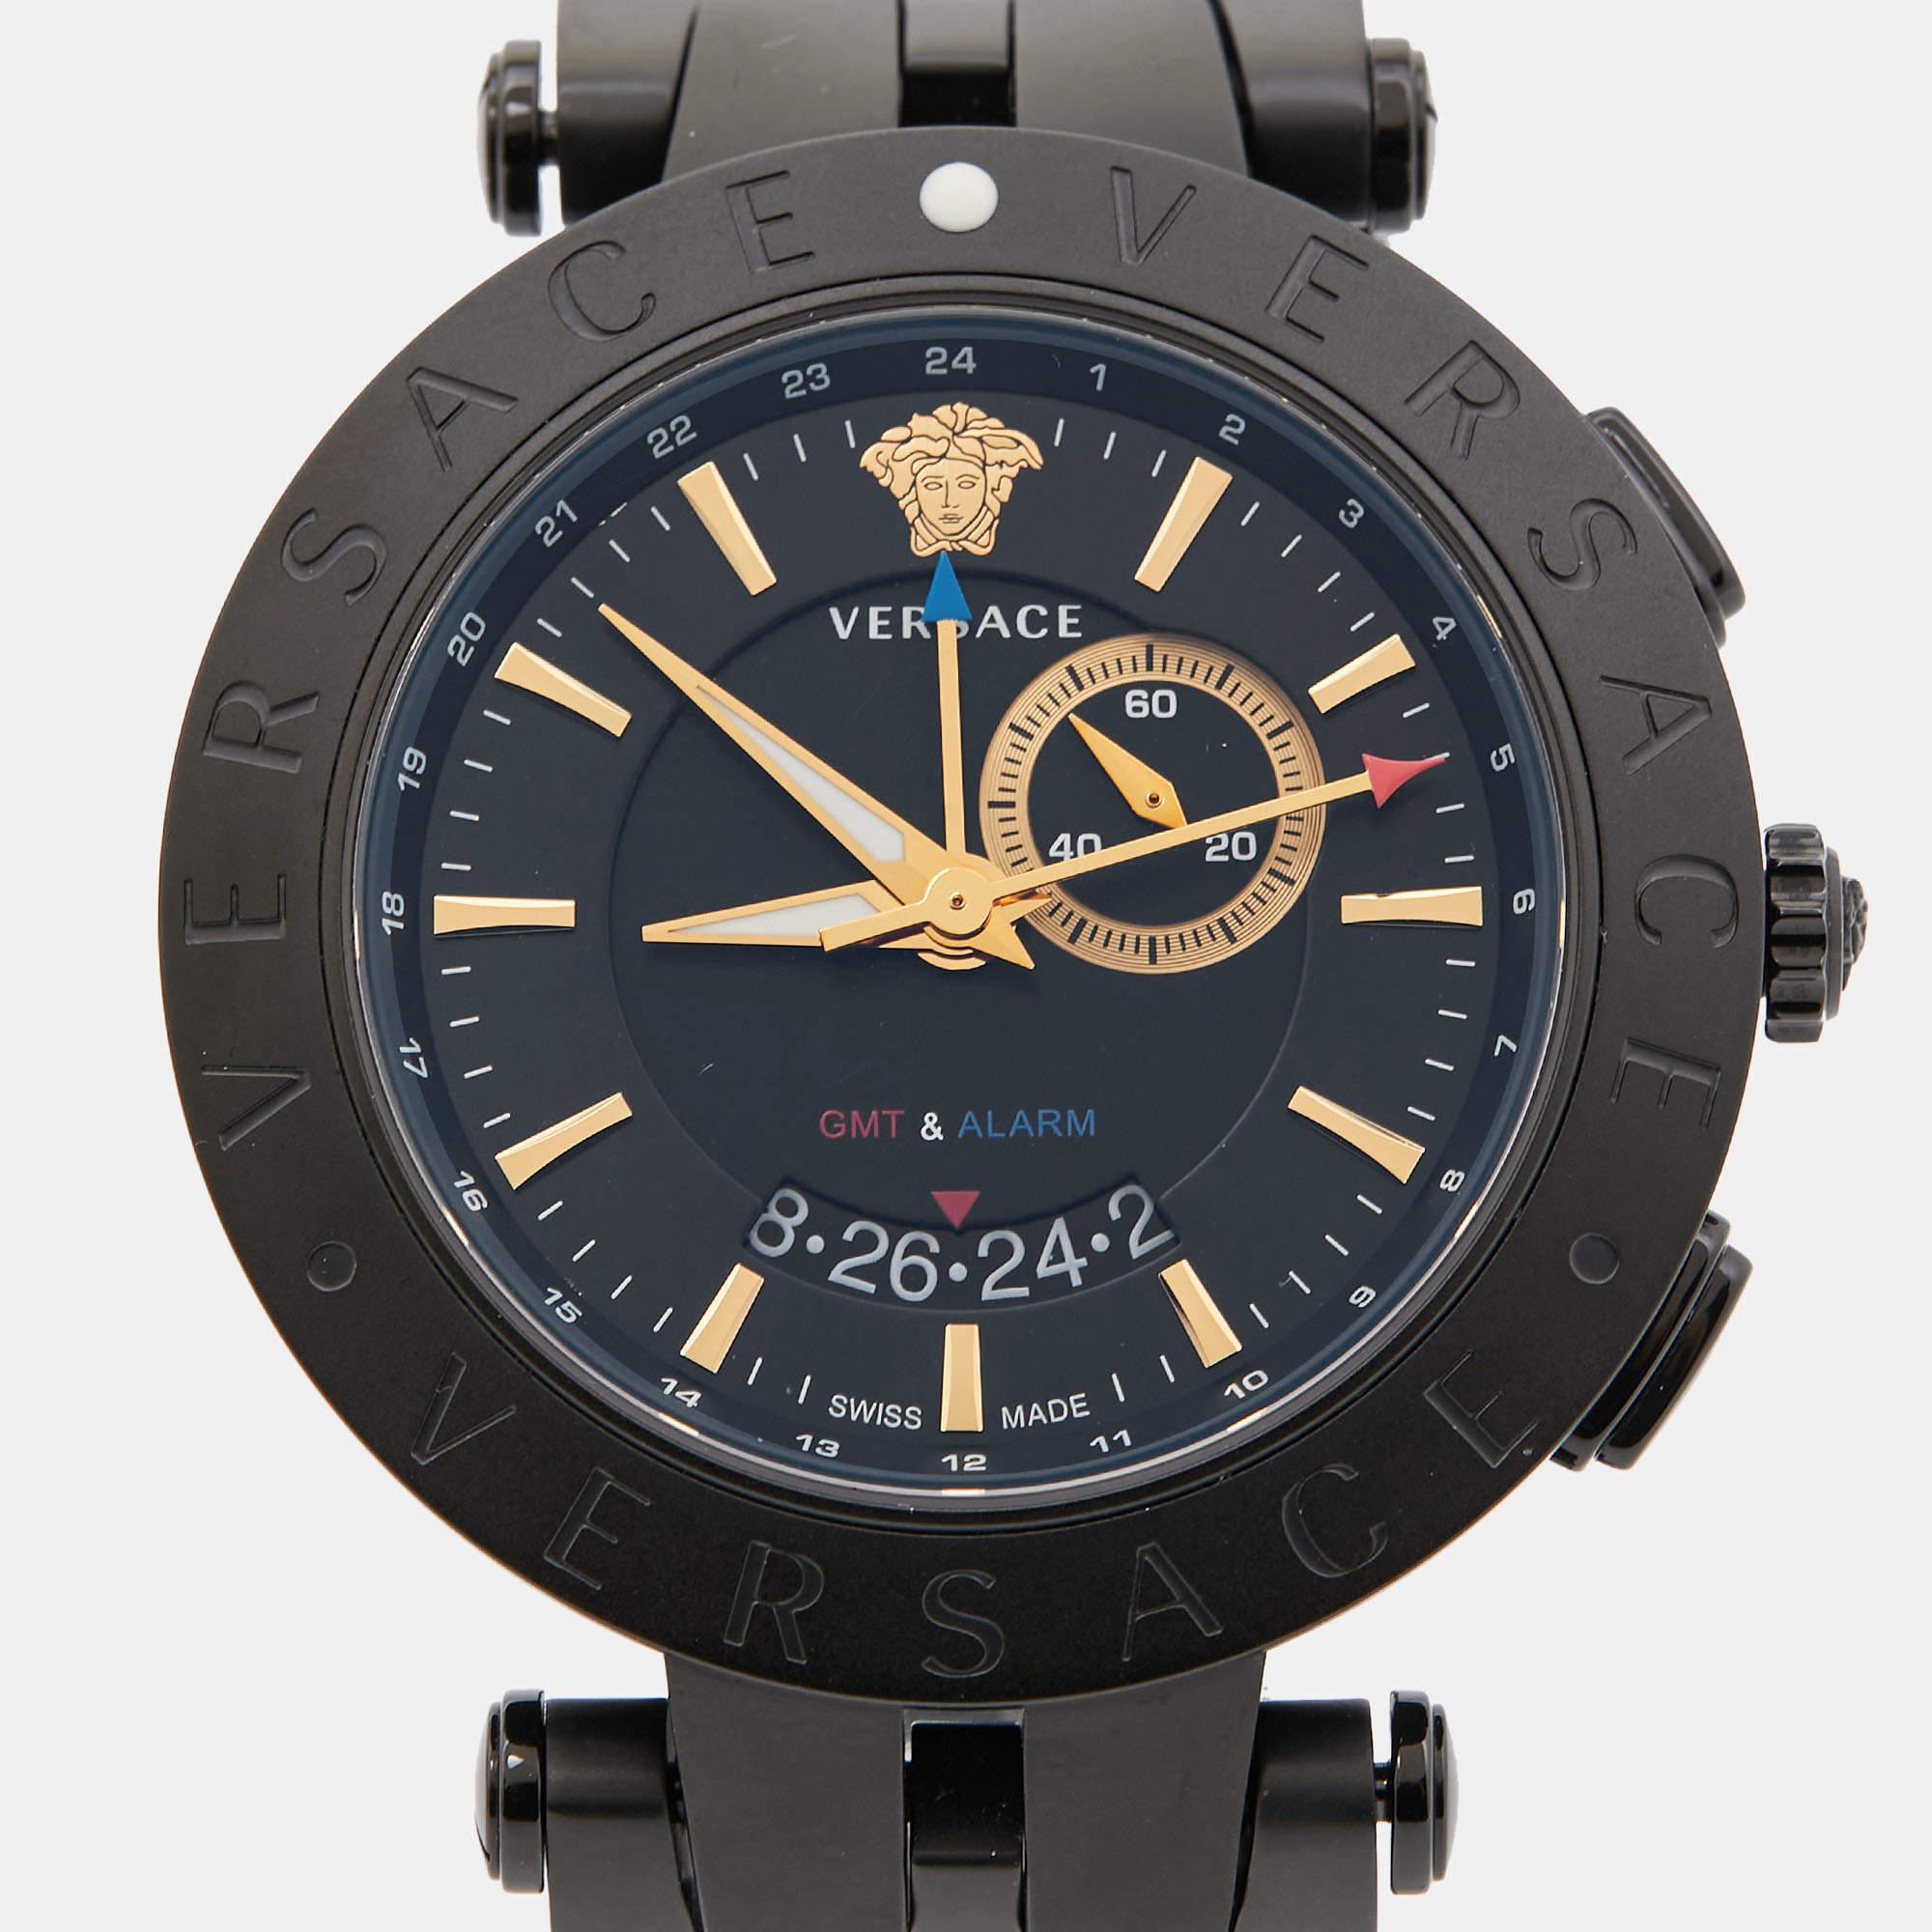 A timeless silhouette made of high-quality materials and packed with precision and luxury makes this Versace wristwatch the perfect choice for a sophisticated finish to any look. It is a grand creation to elevate the everyday experience.

